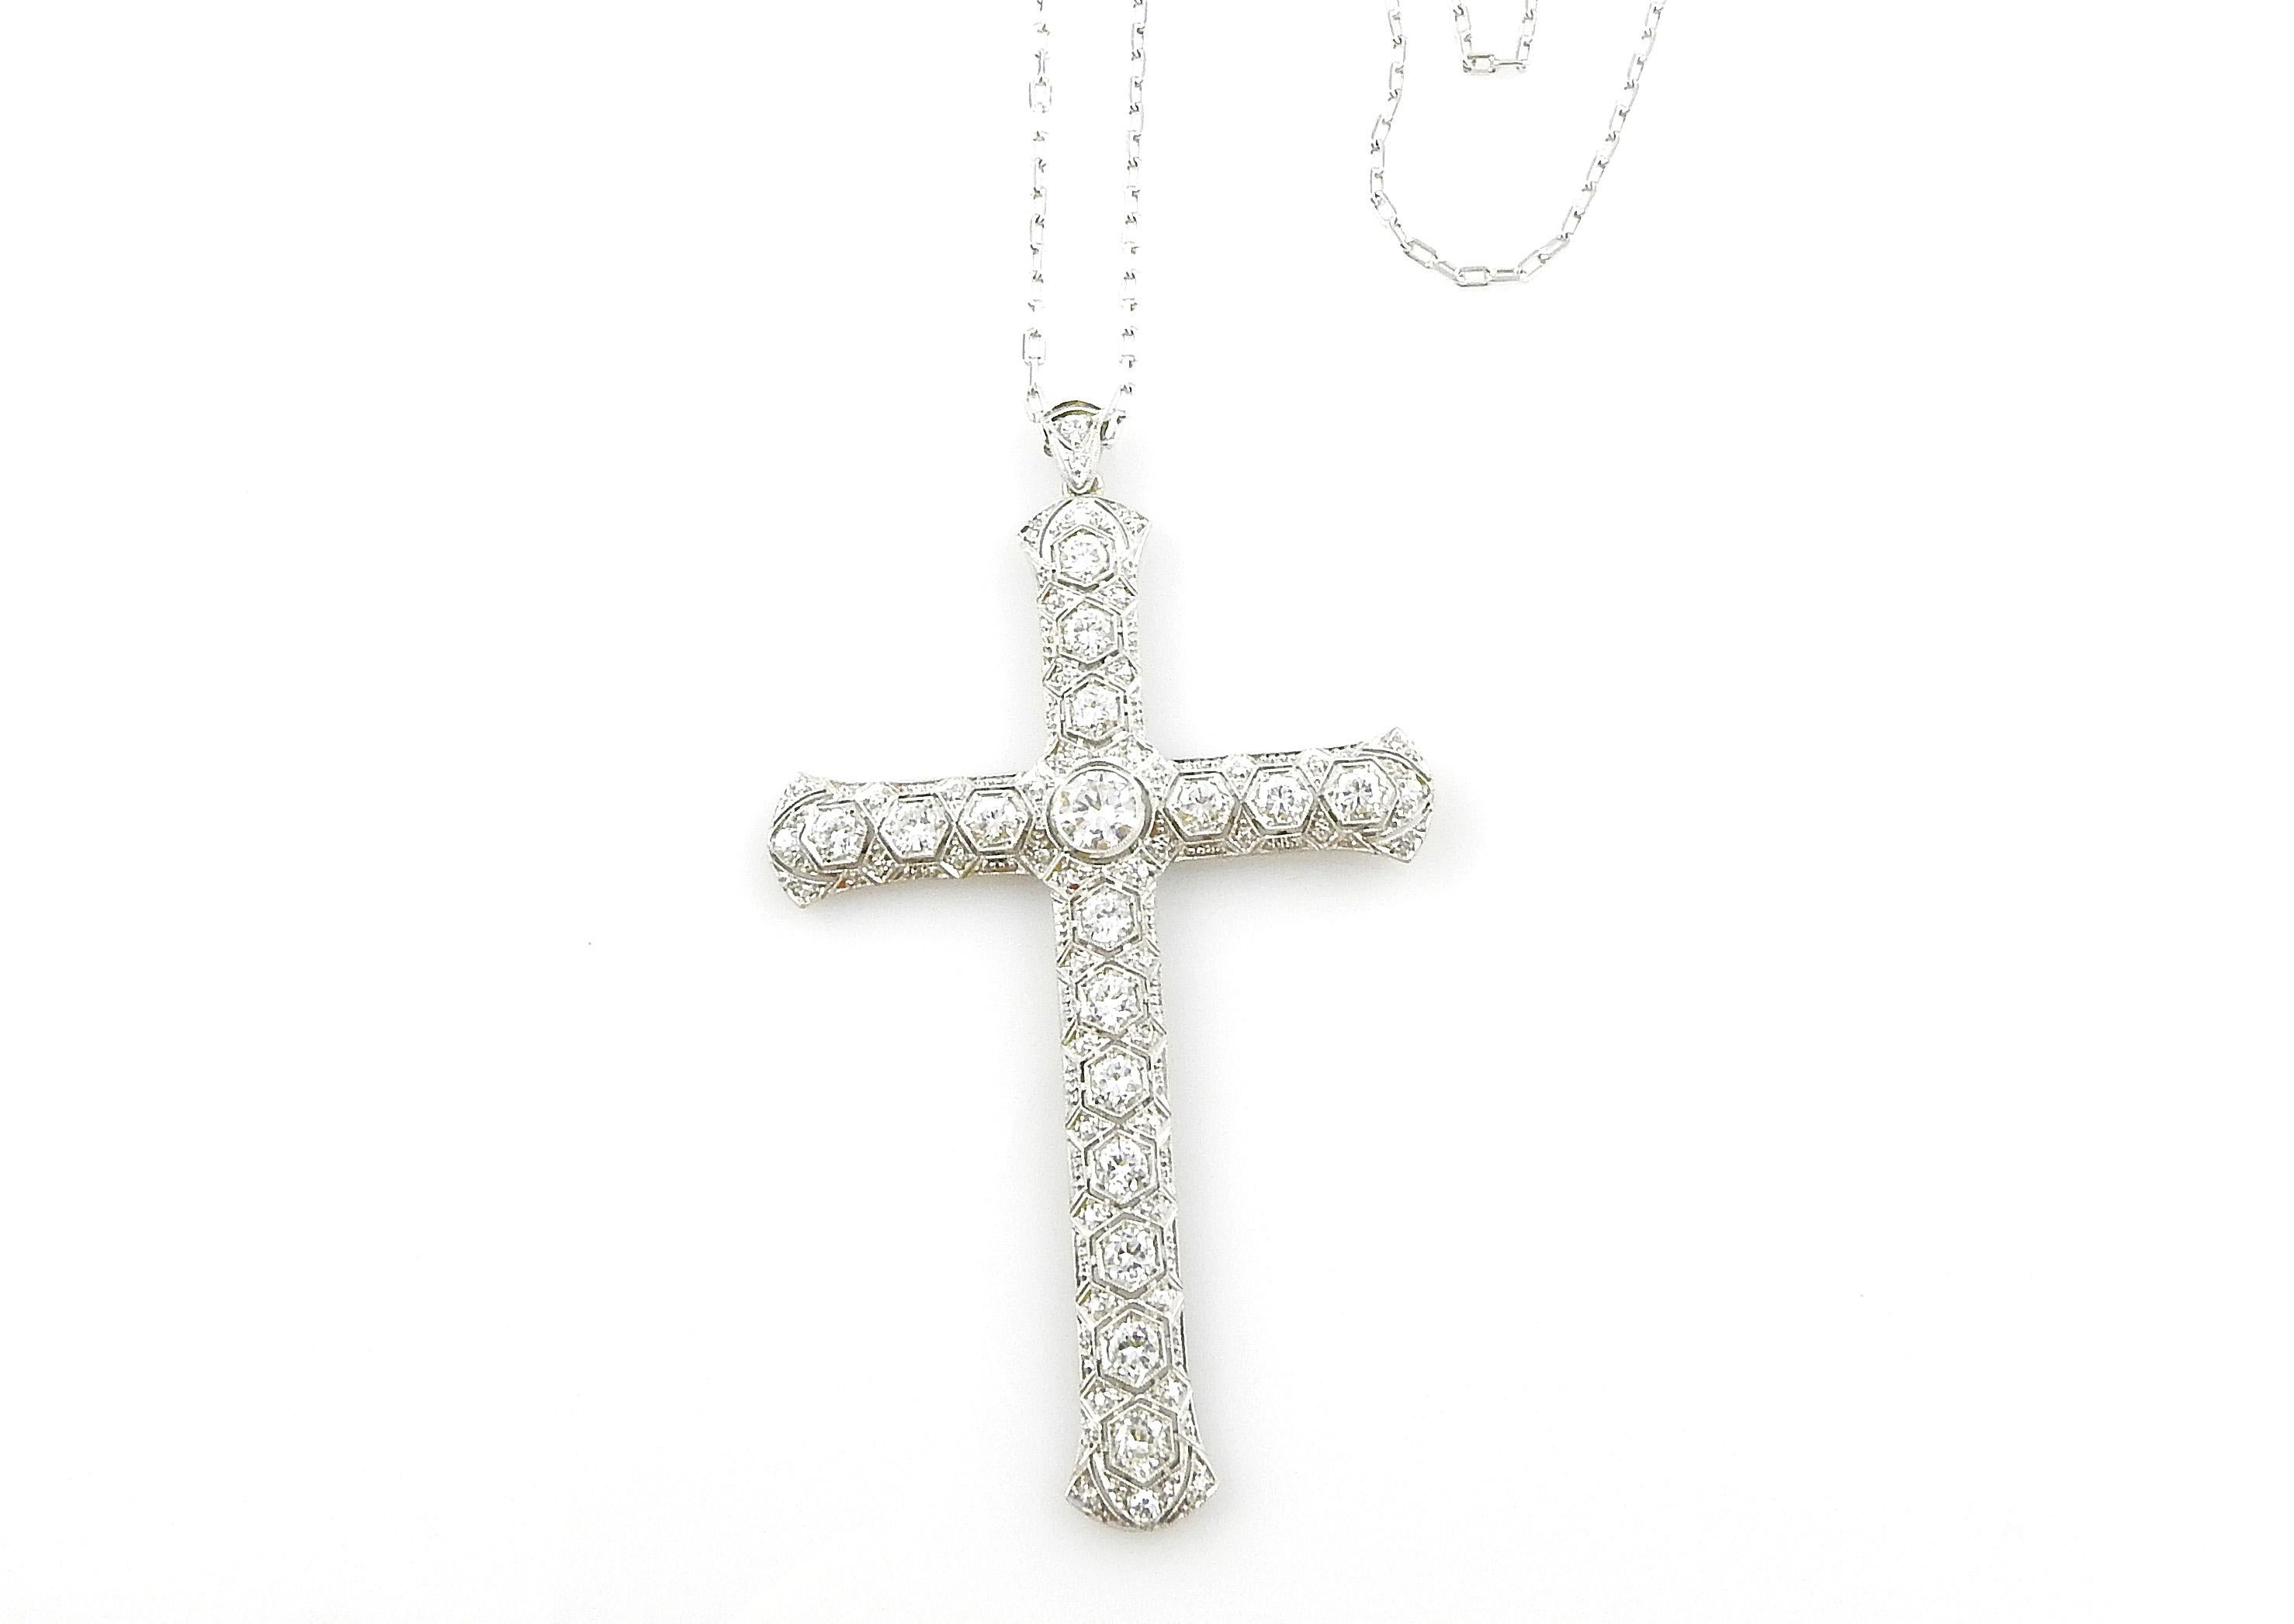 14K White Gold Large Diamond Cross Pendant Necklace 3.51cts #14328 For Sale 1